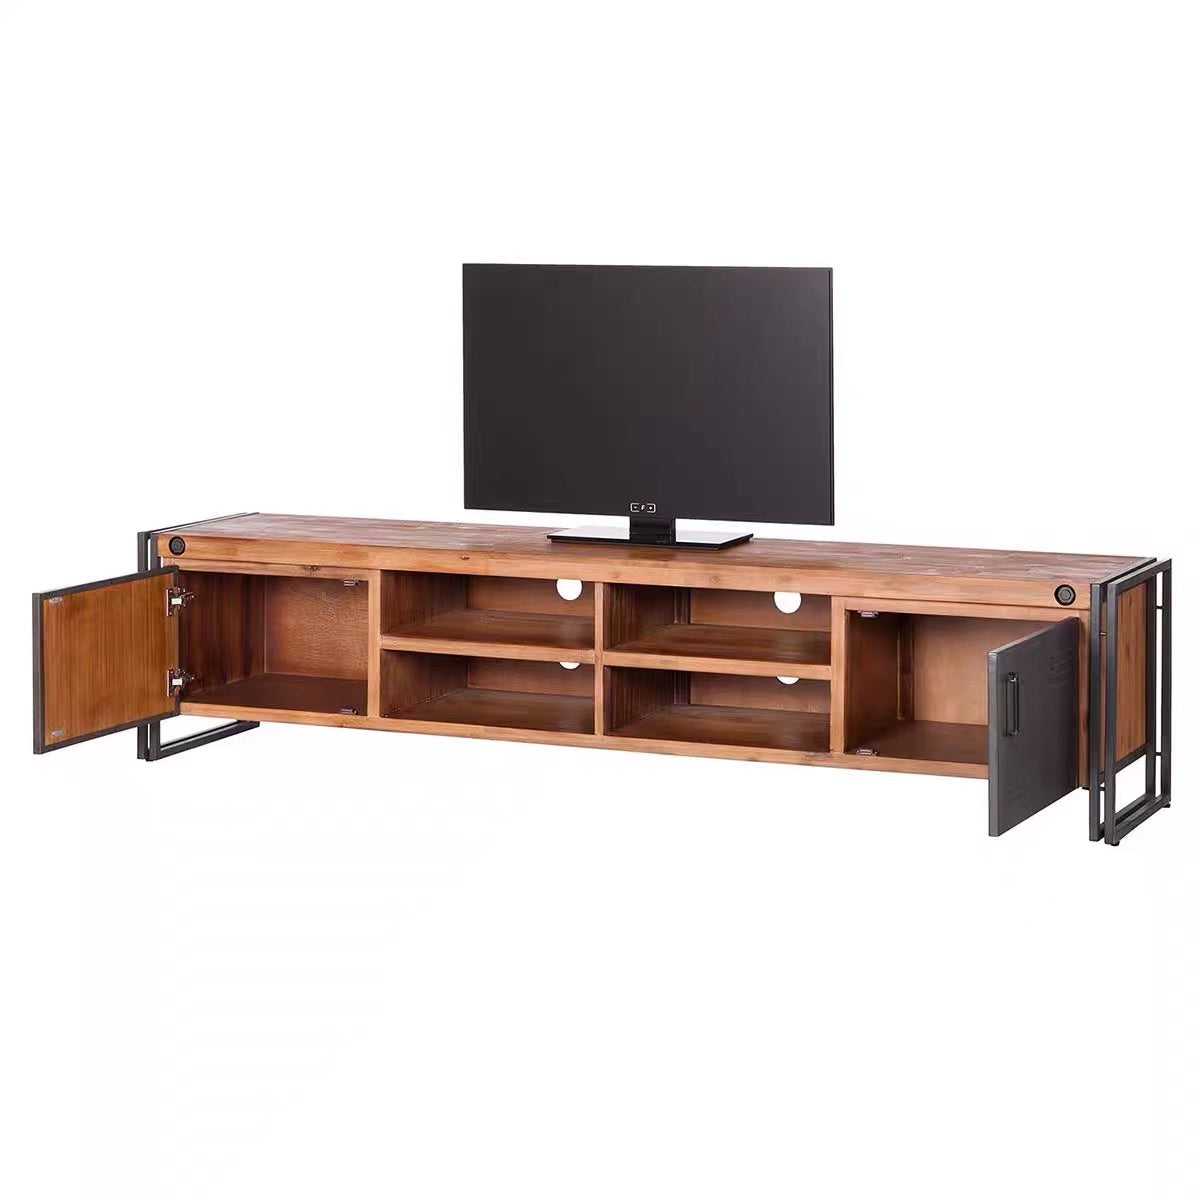 Matherne TV Media Console Table - 4 Seasons Home Gadgets